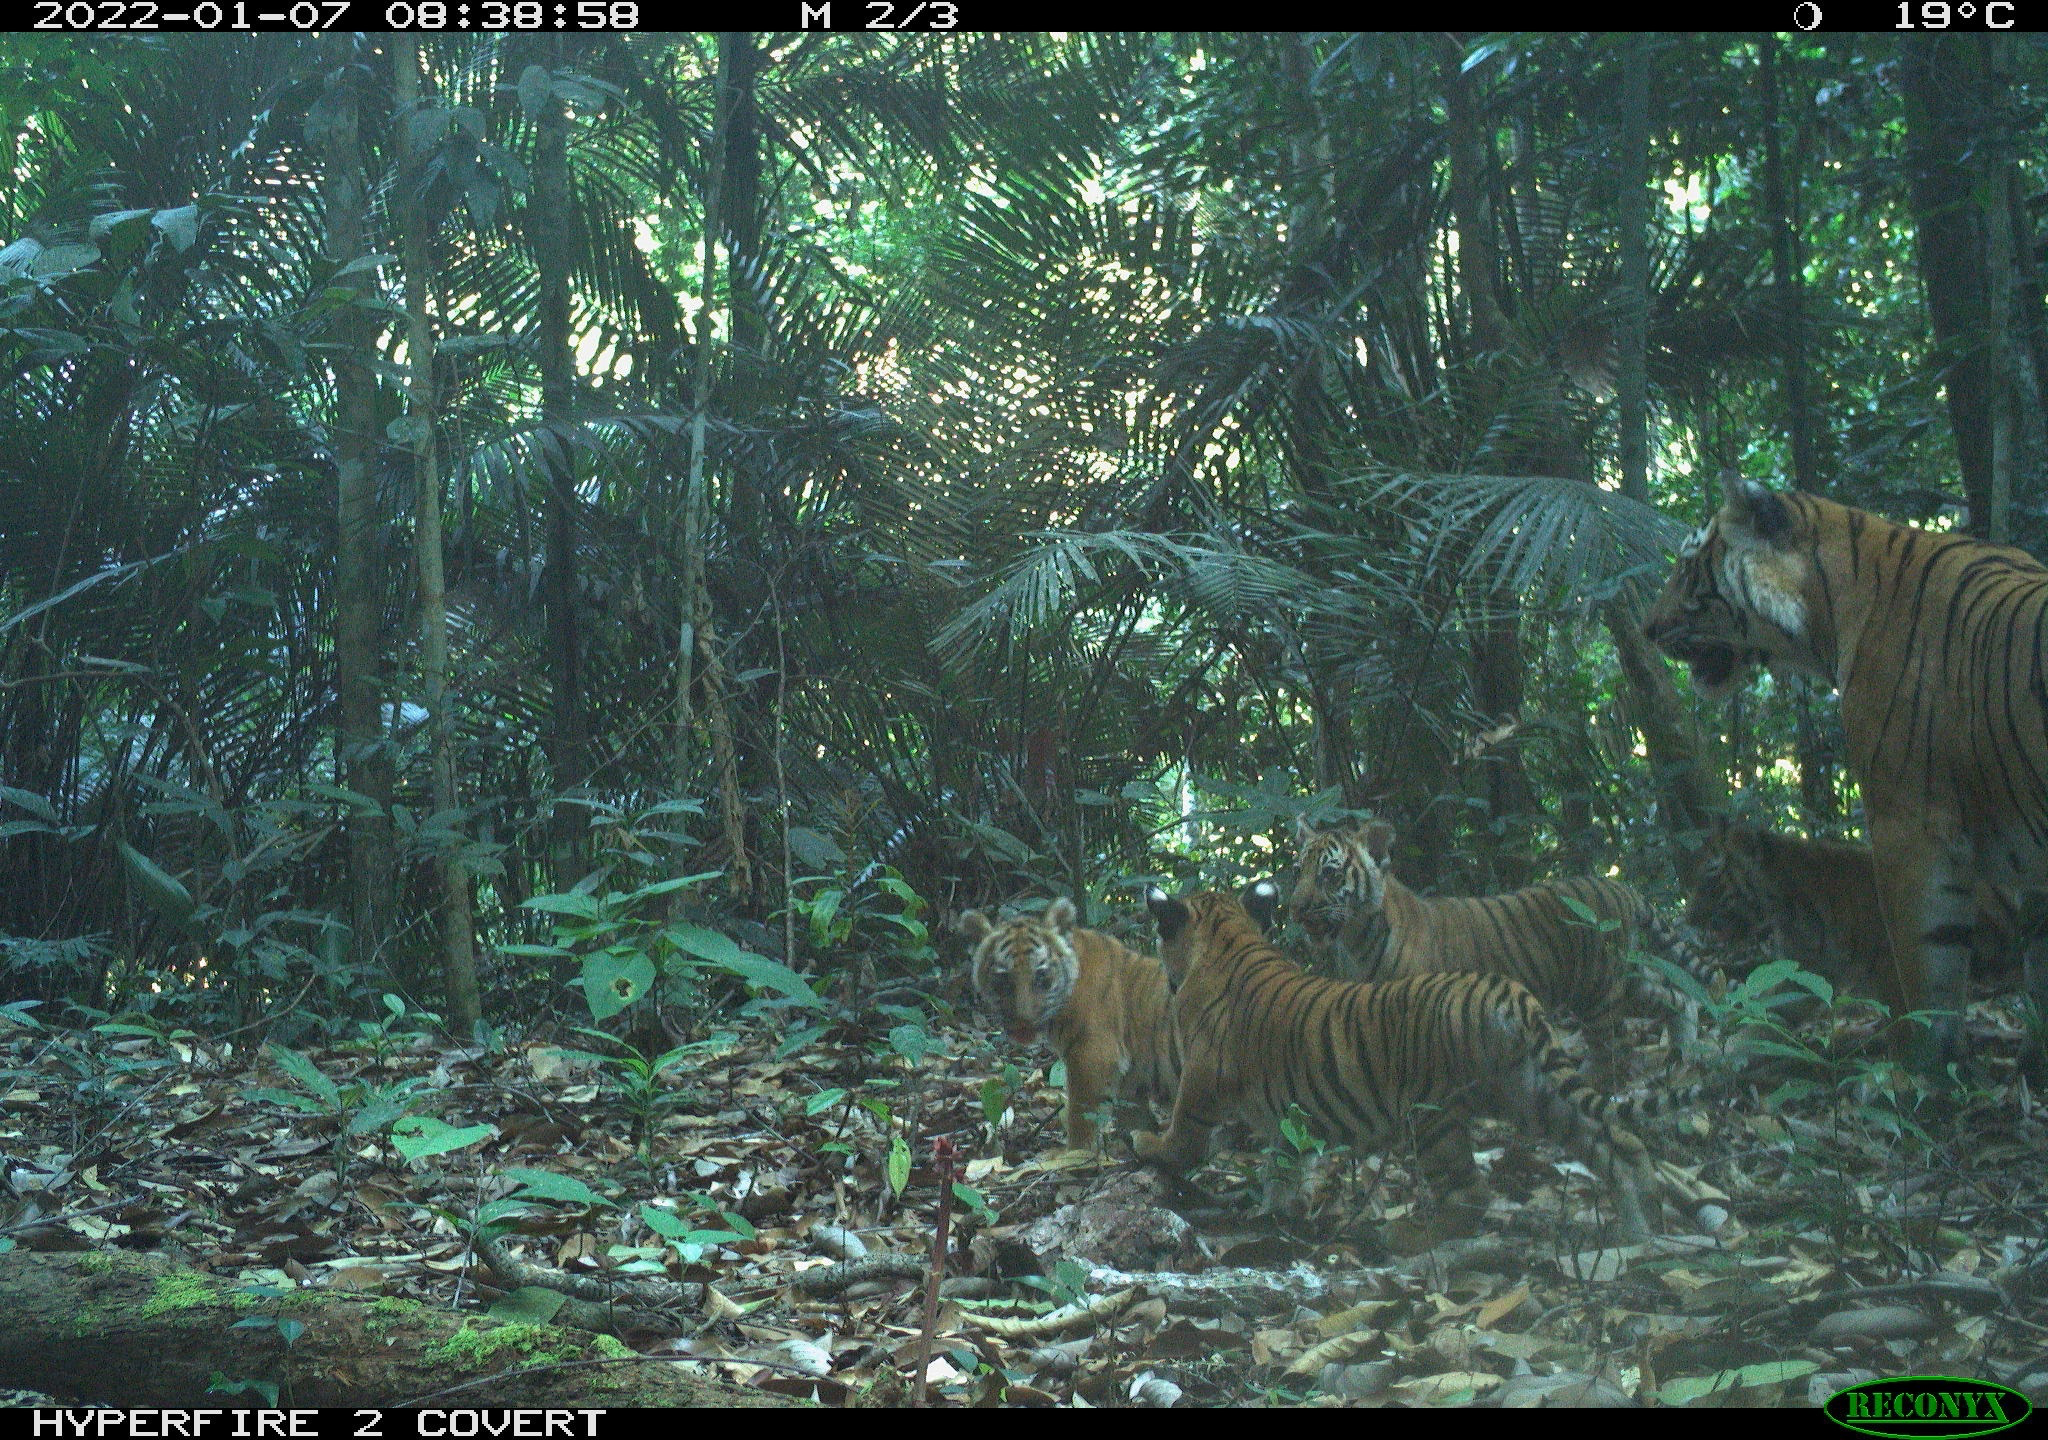 Four malayan tiger cubs spotted brings hope to the species that are facing extinction